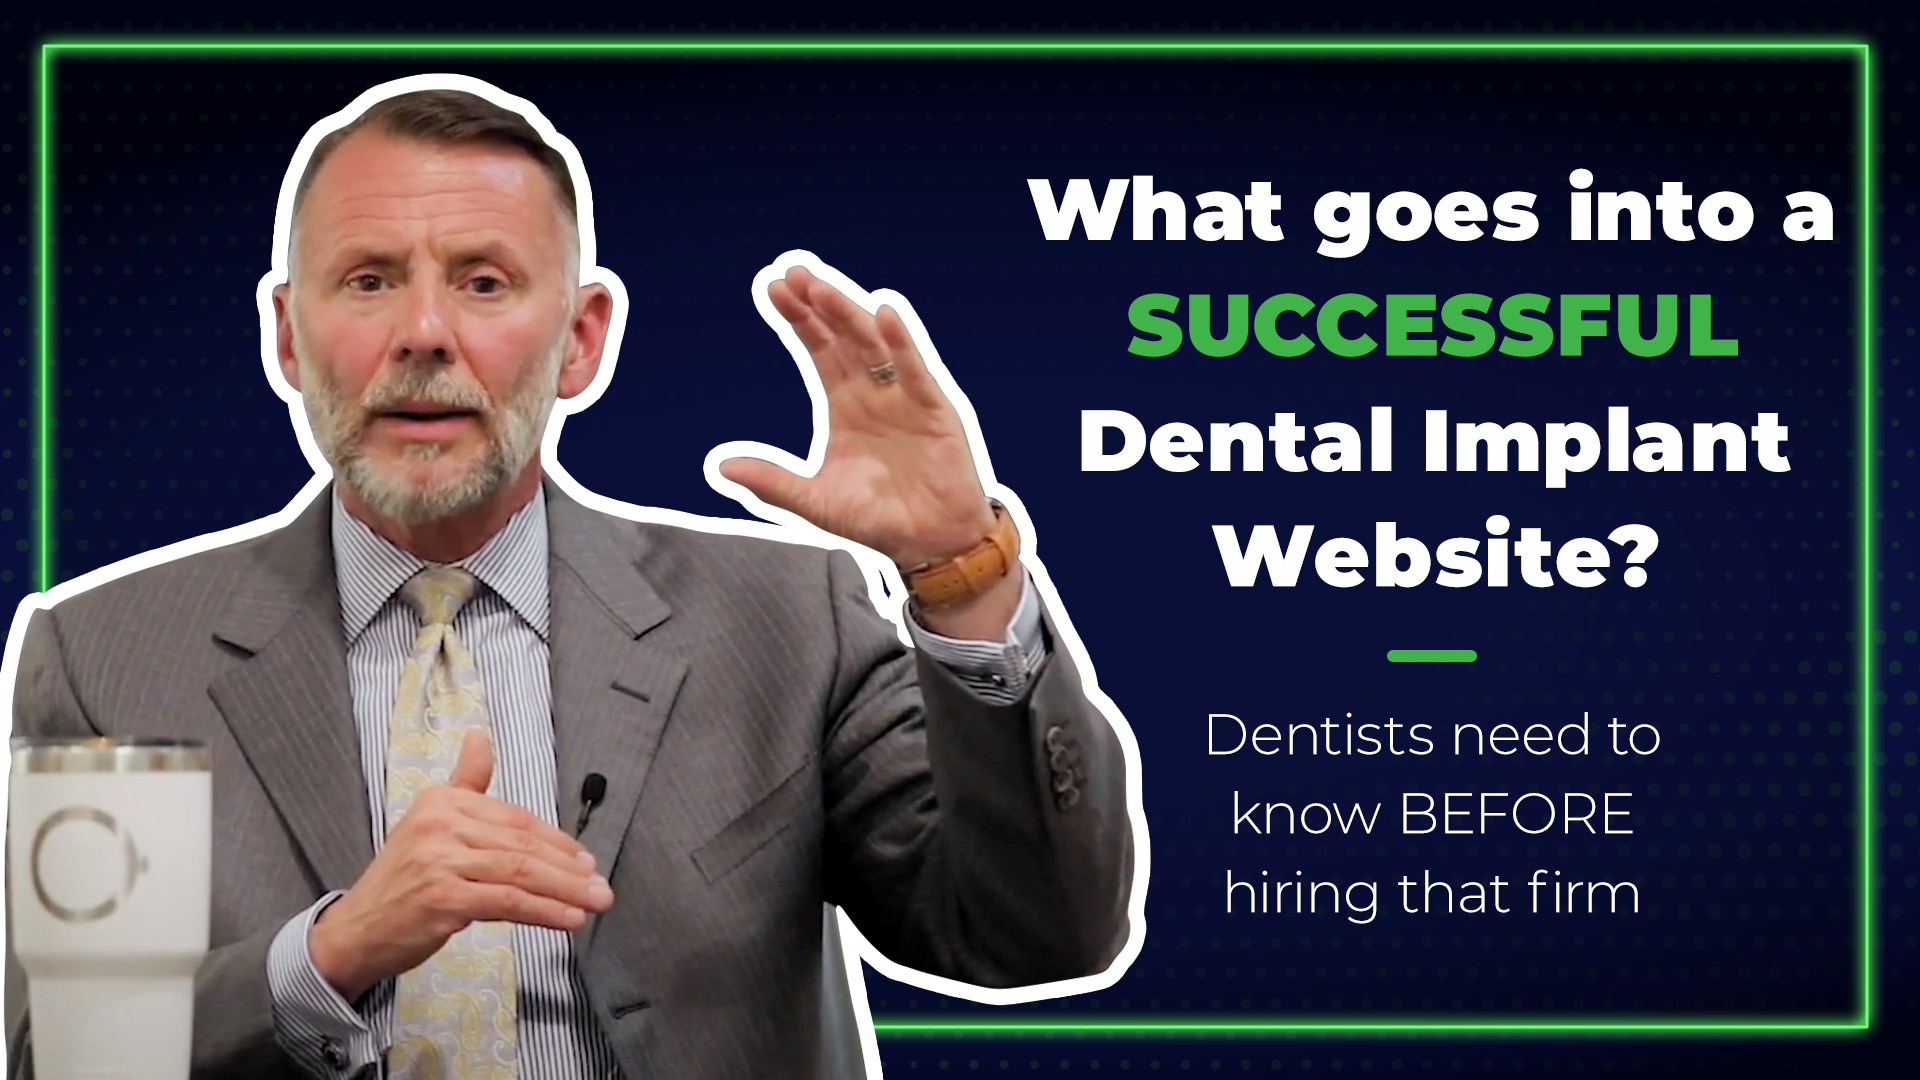 Tools to grow your practice | What goes into a Successfull Dental Implant Website Dentists need to know Before Hiring the firm